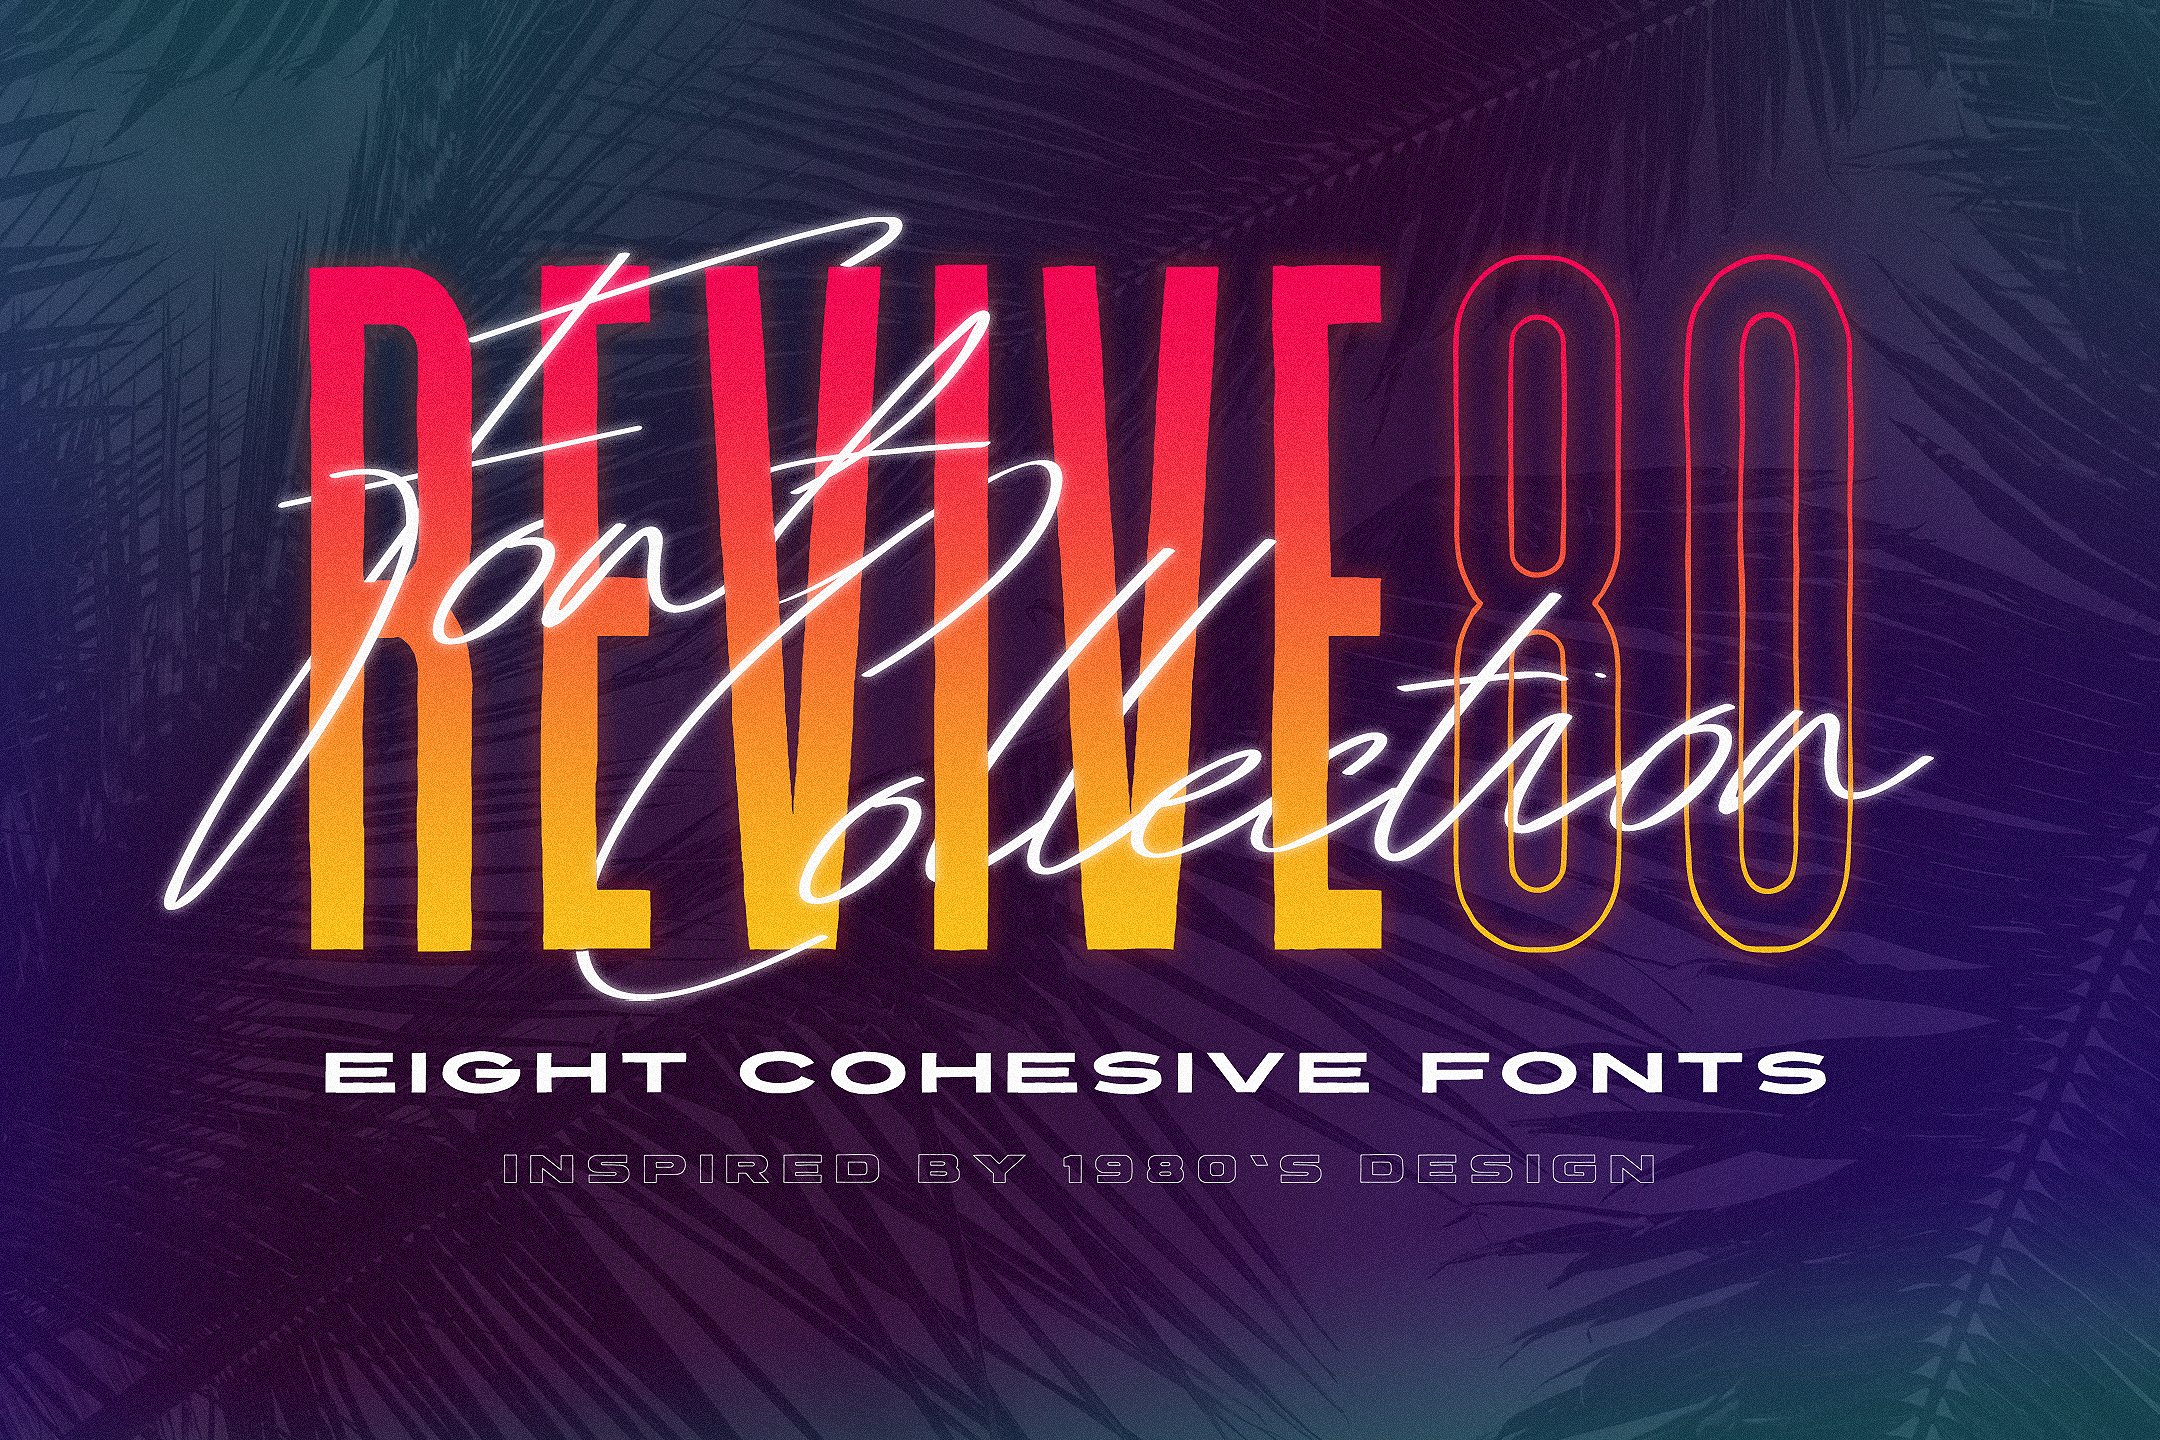 Revive 80 - Retro 1980's Font Pack cover image.